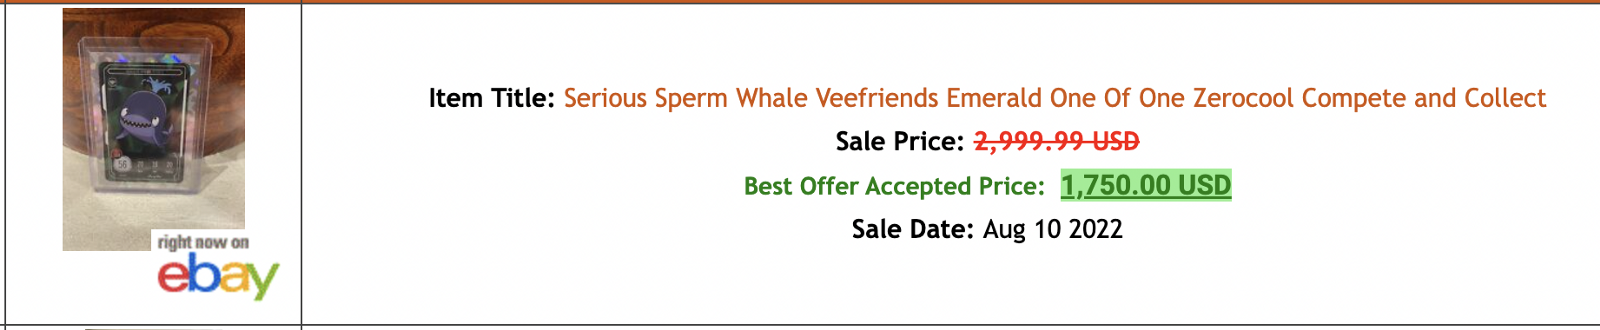 Serious Sperm Whale VeeFriends Compete and Collect Emerald One of One Record Sale